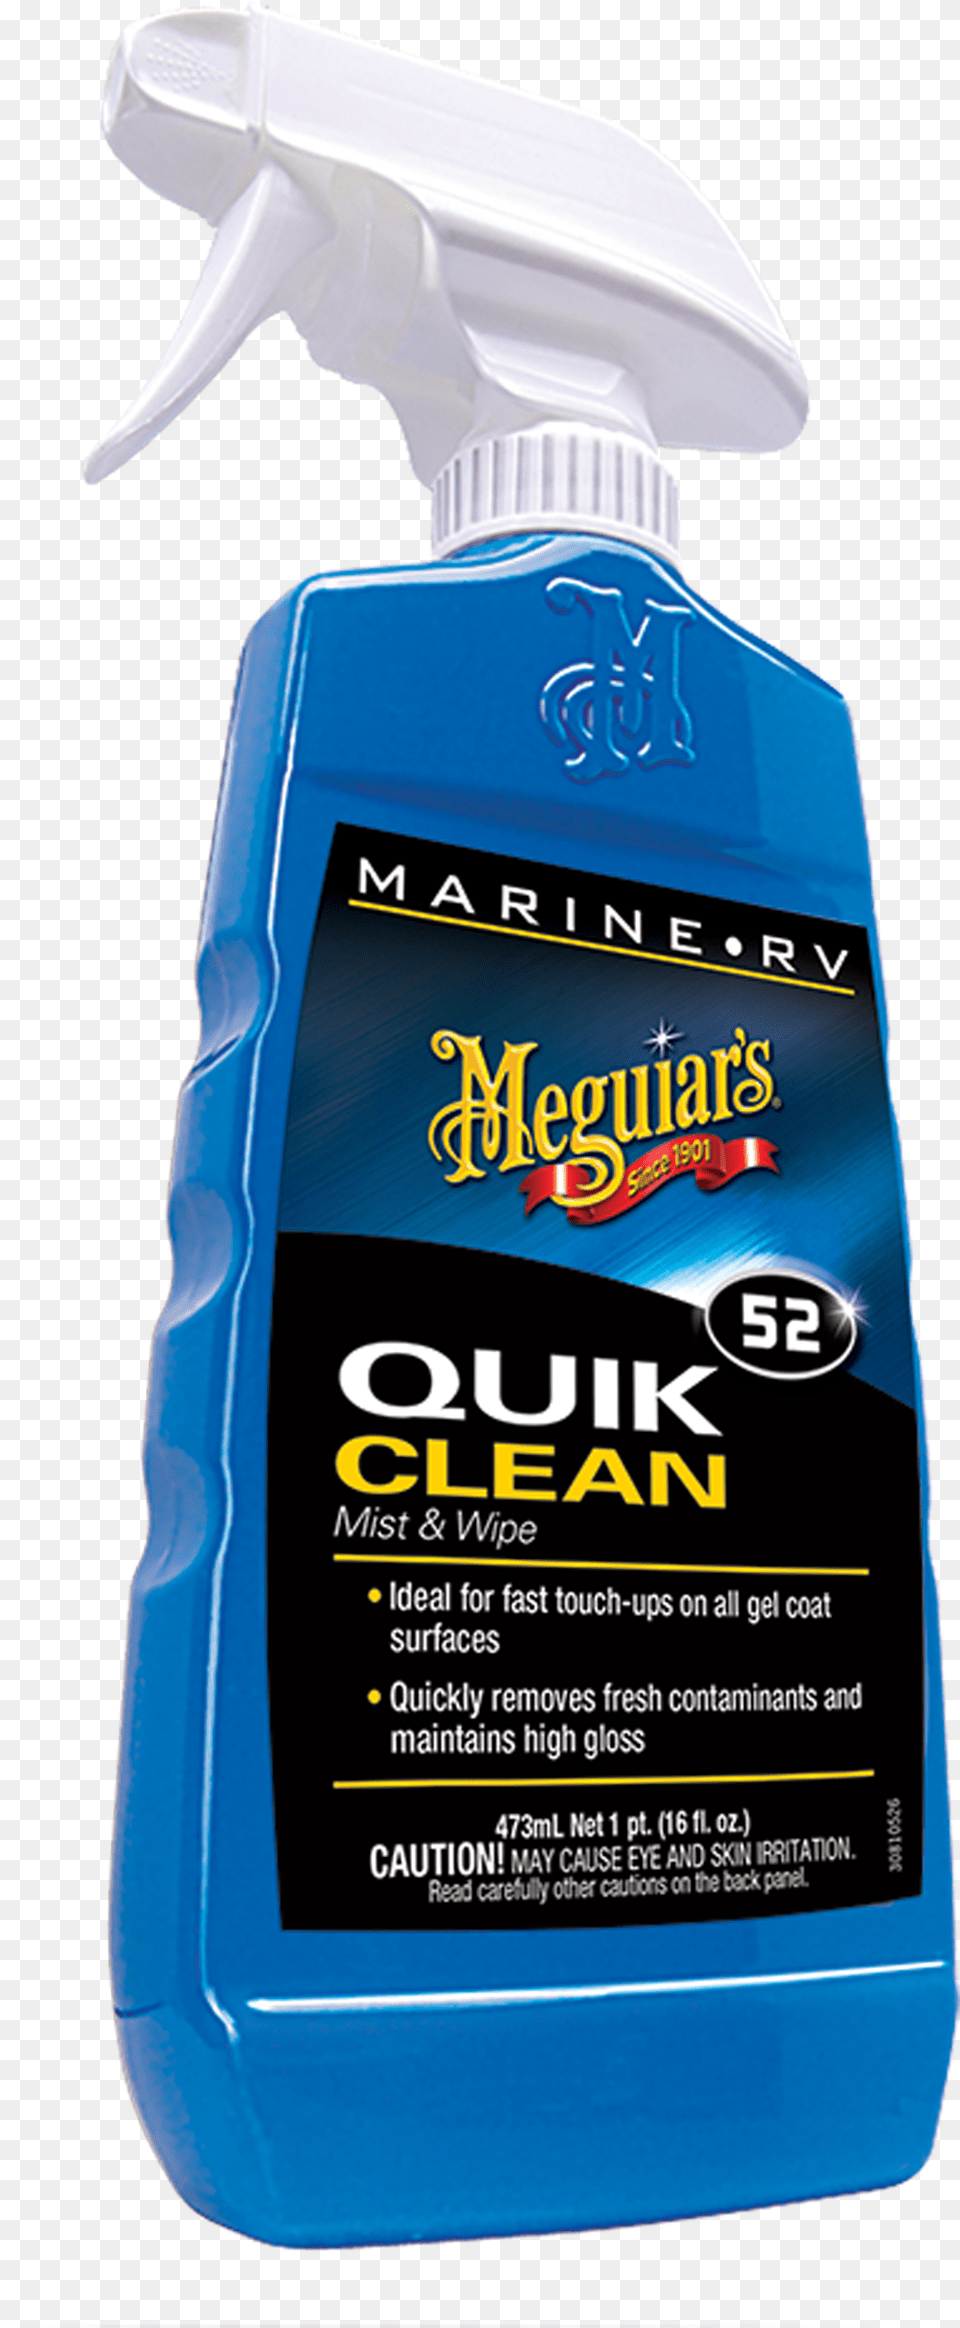 Quik Clean Mist Amp Wipe Meguiars Marine Polish, Bottle, Cleaning, Person, Cosmetics Free Transparent Png